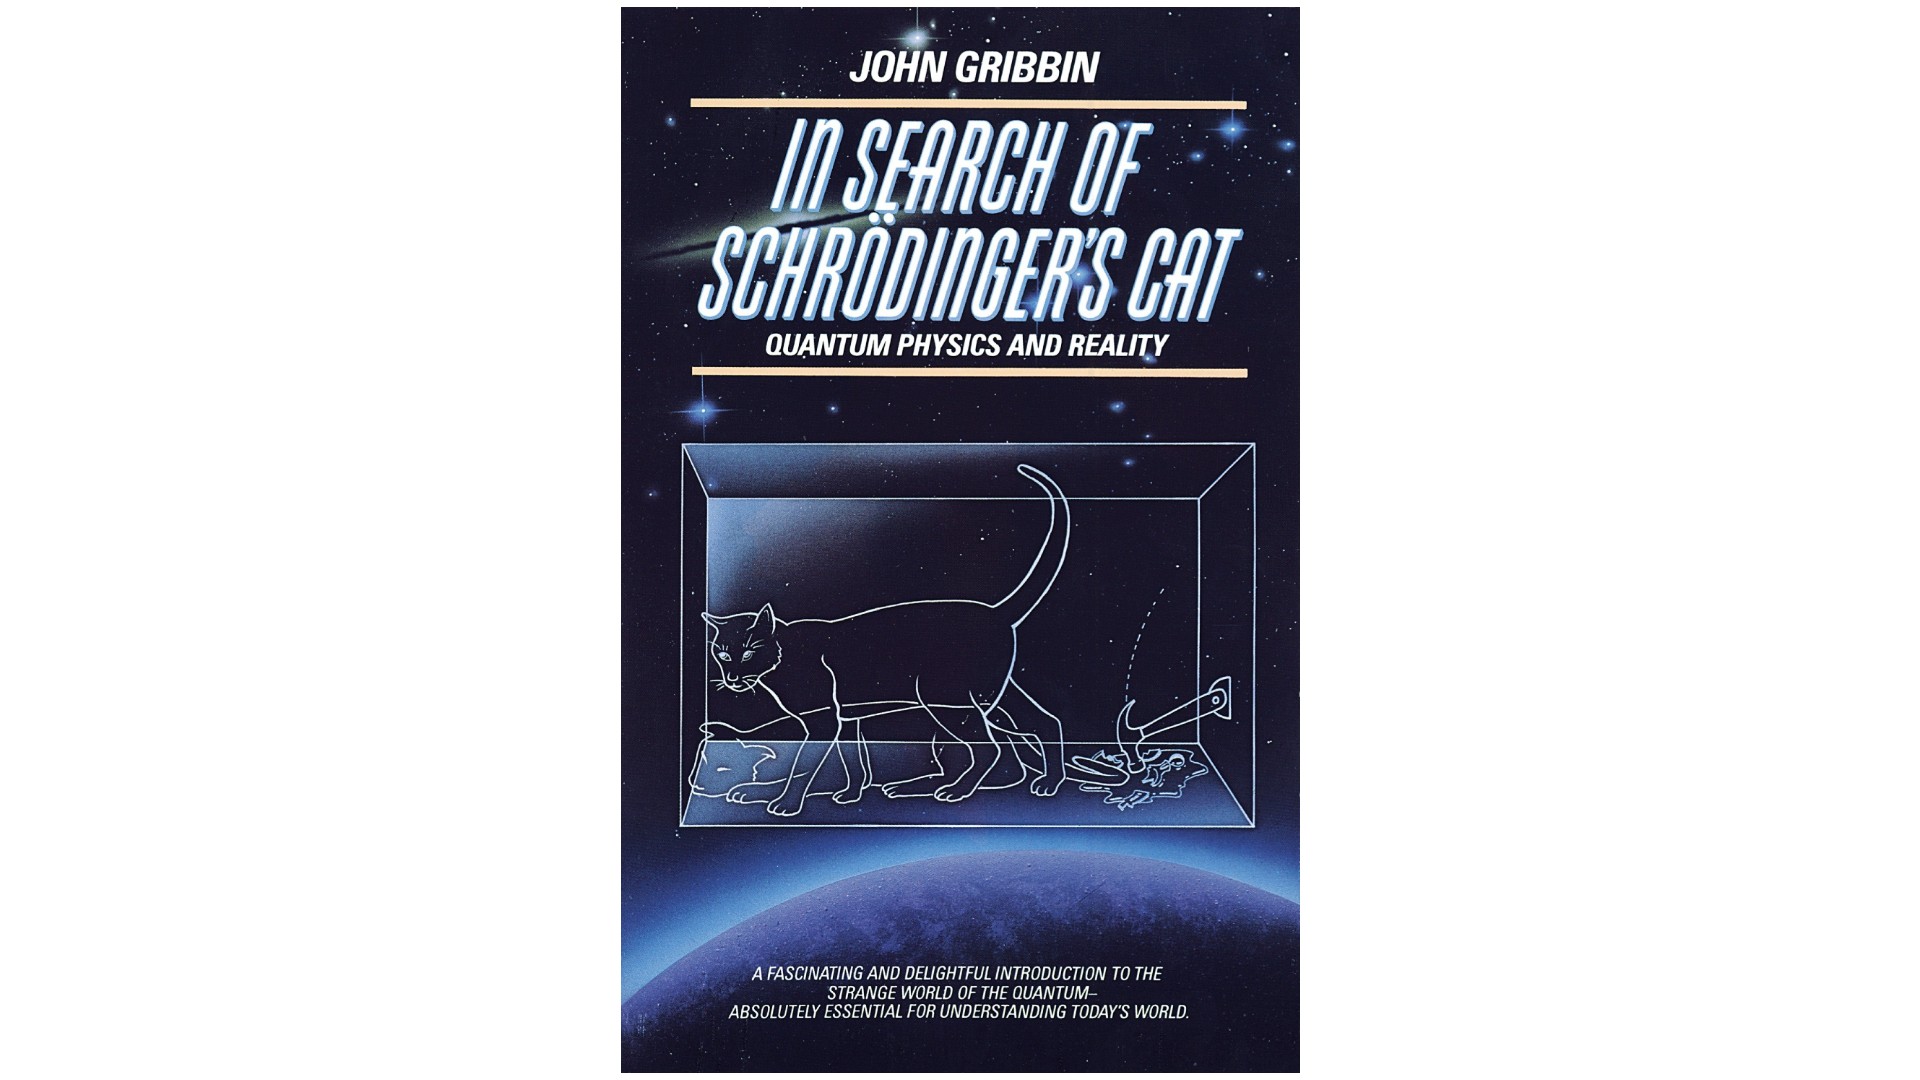 In Search of Schrodinger's Cat Quantum Physics and Reality by John Gribbin